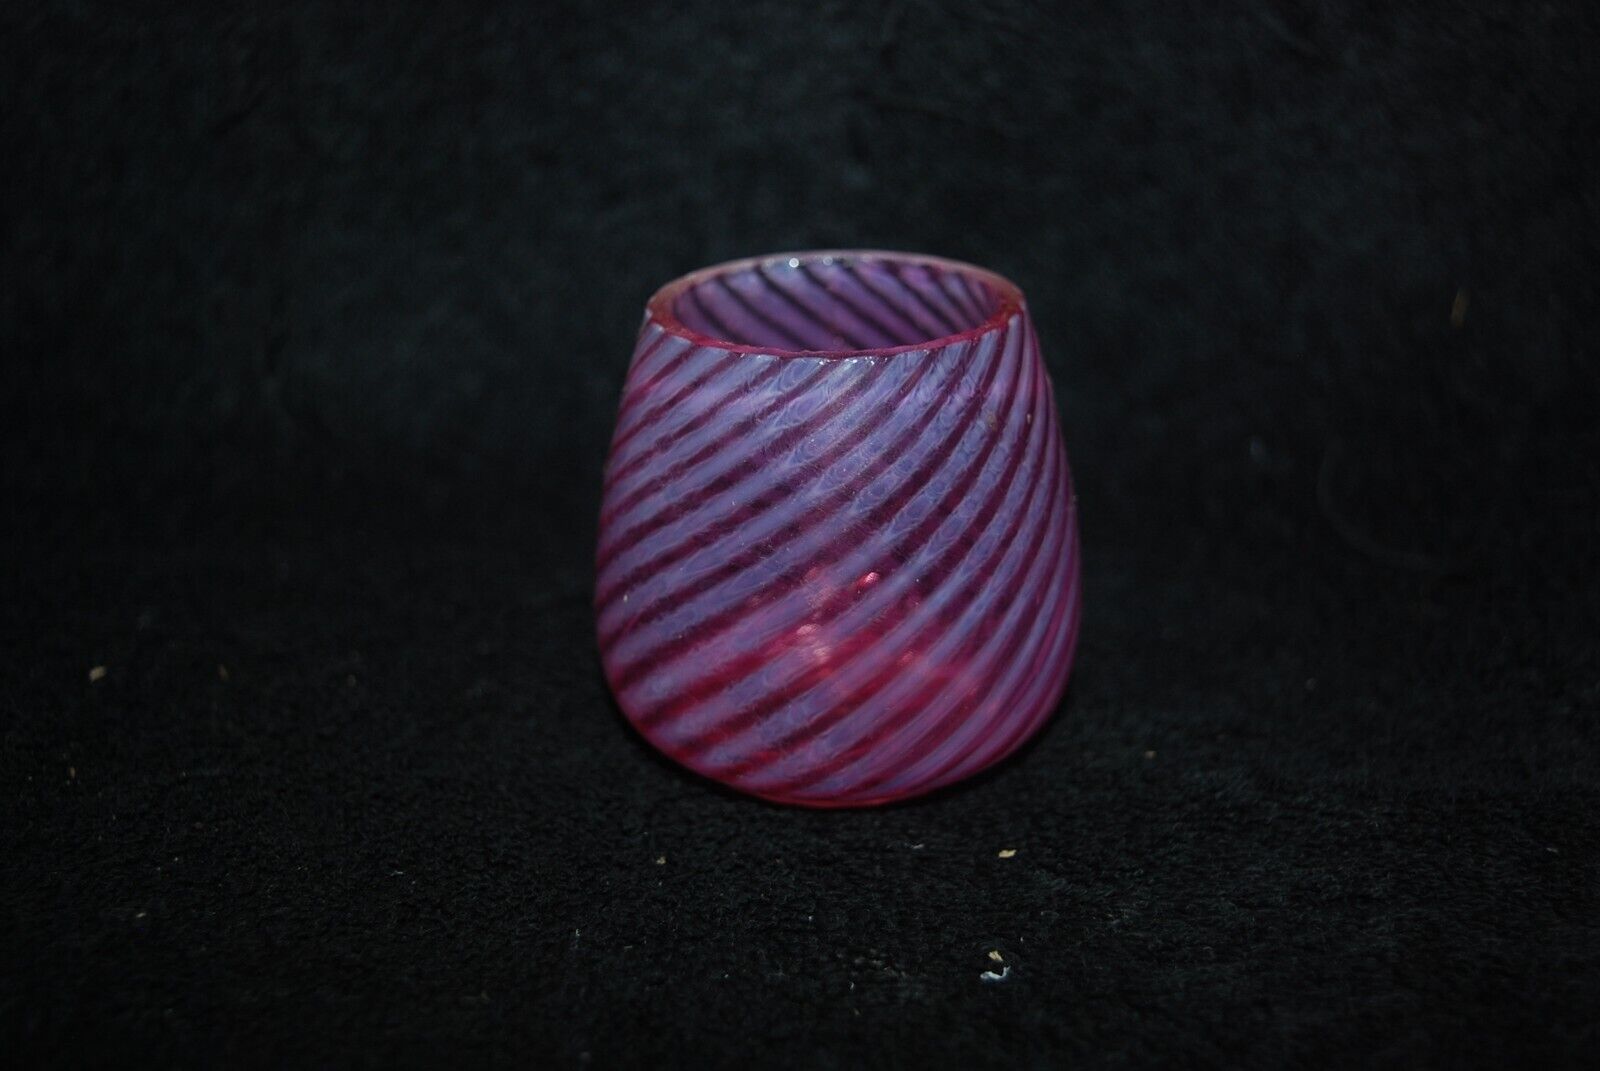 BEAUTIFUL NICKEL PLATE CRANBERRY OPALESCENT SWIRL TOOTHPICK HOLDER 1890'S